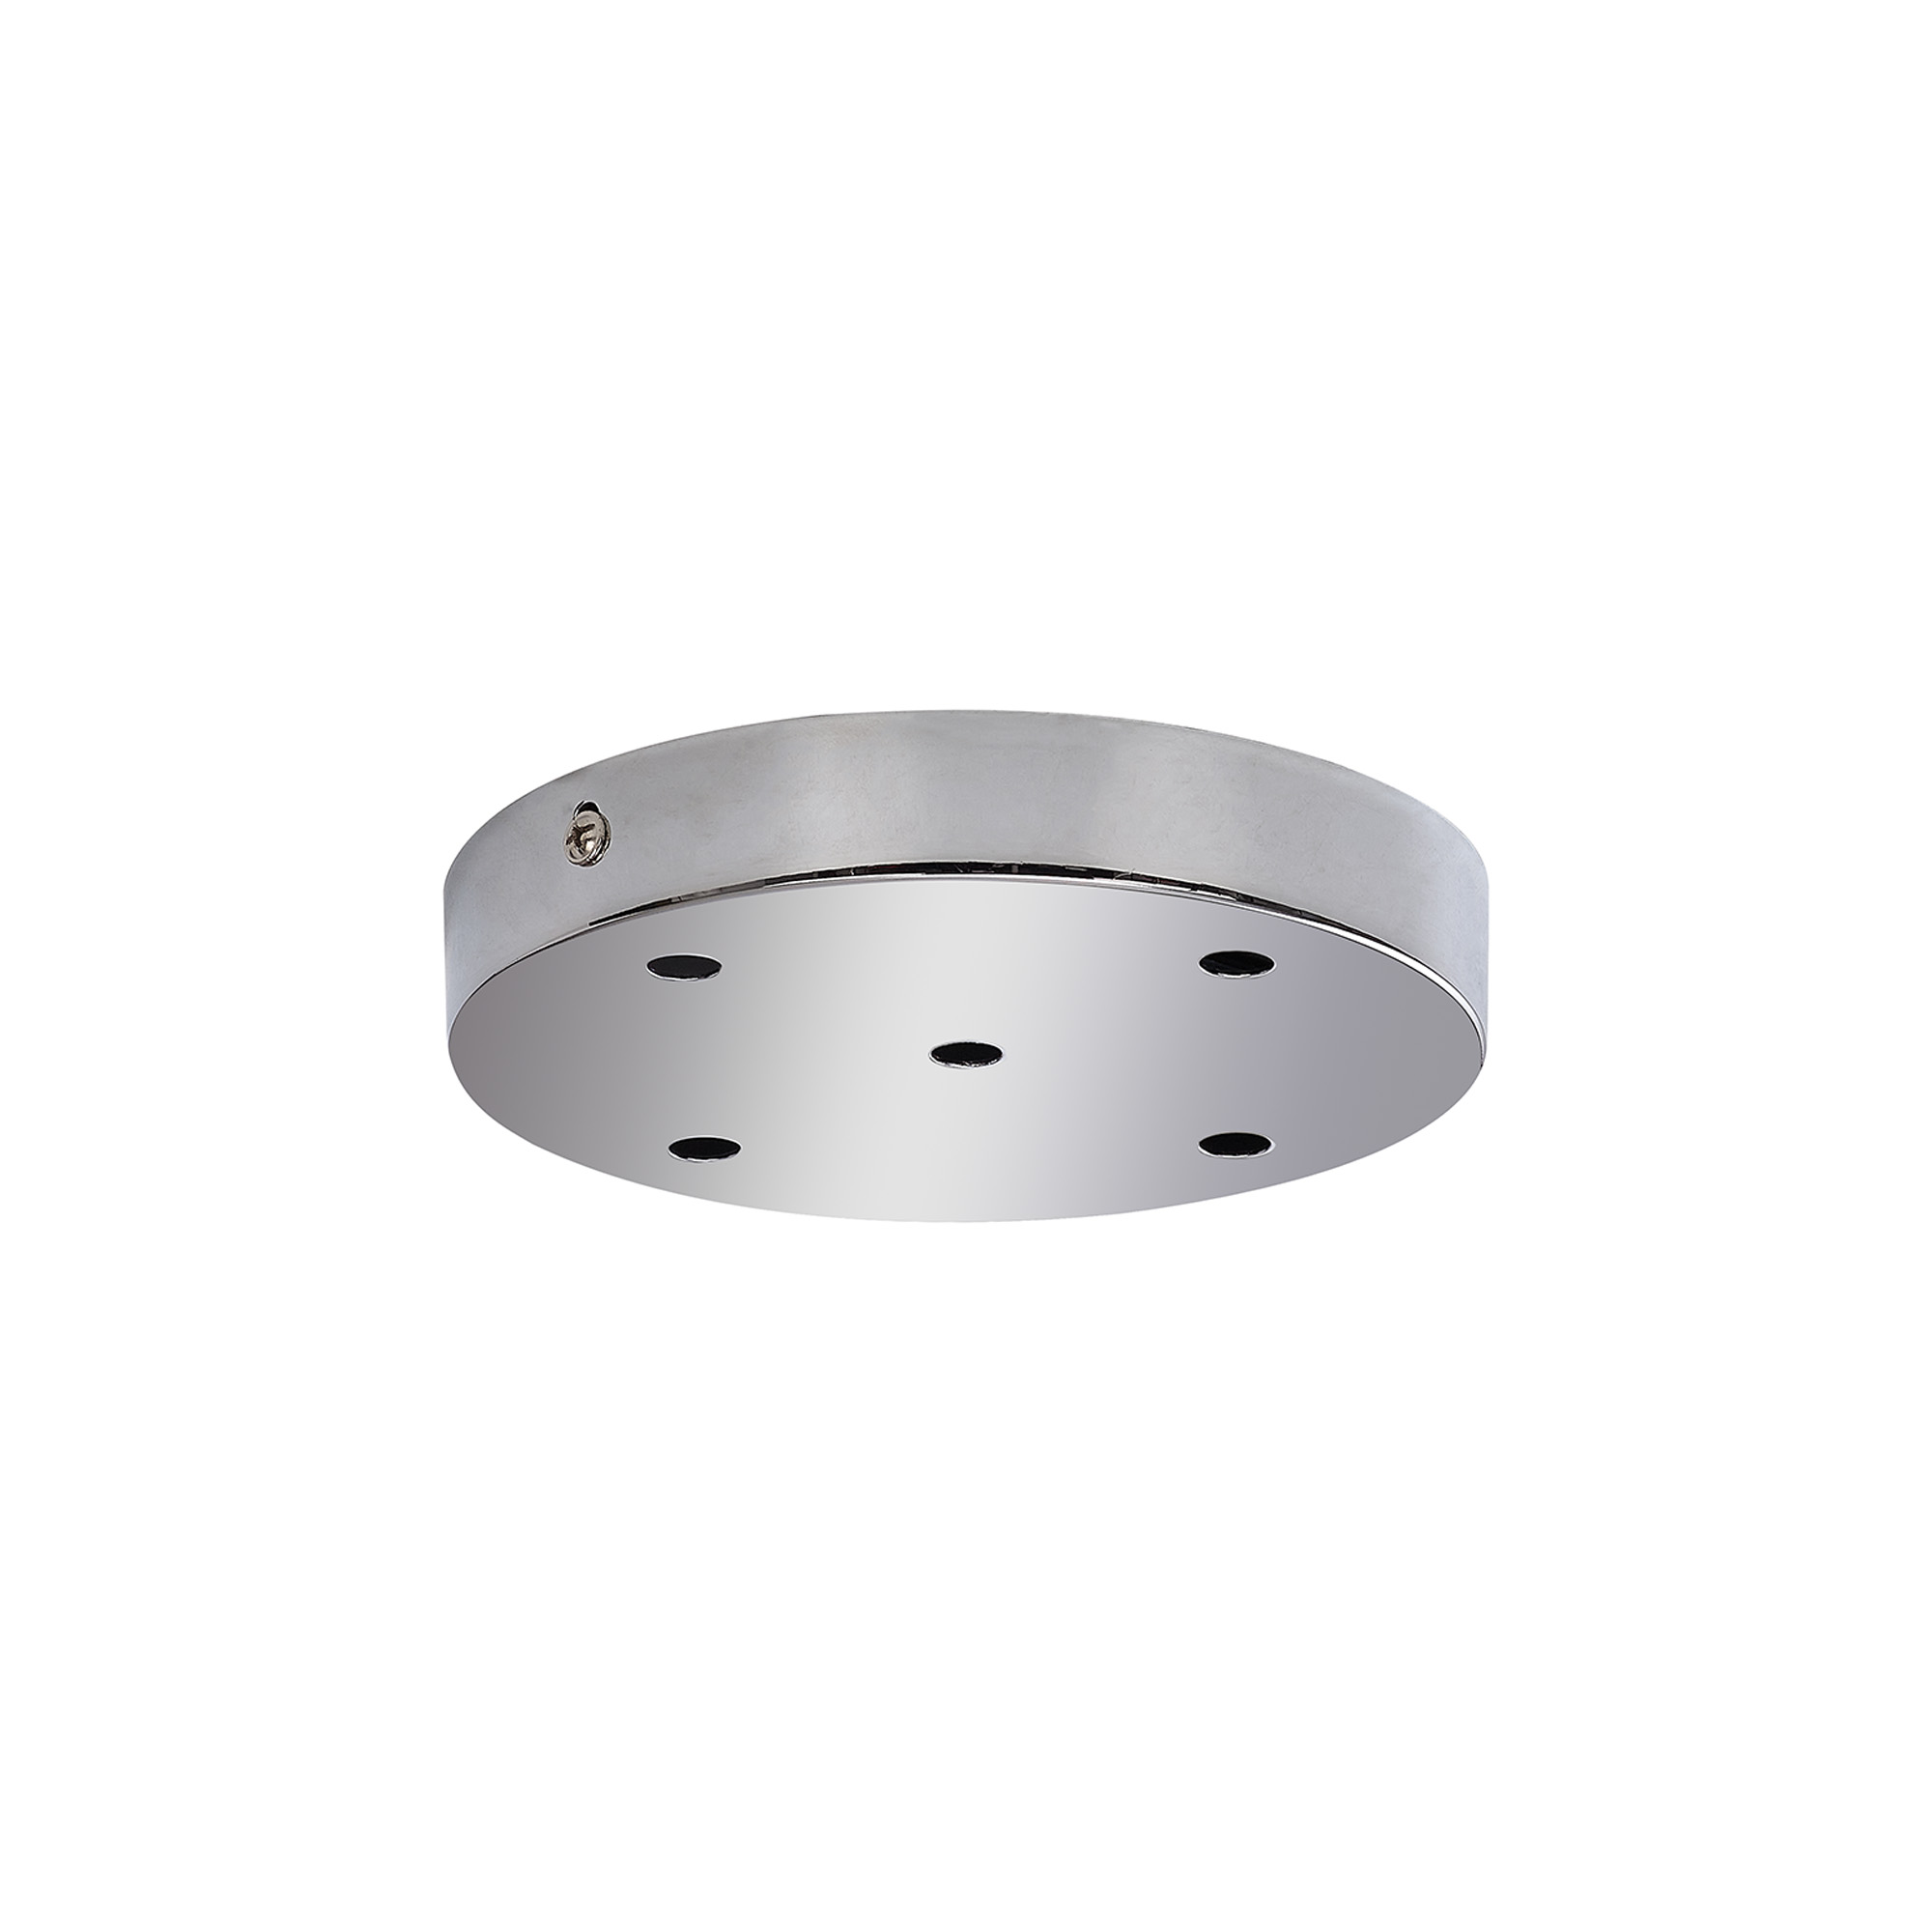 D0828CH  Hayes 5 Hole 15cm Ceiling Plate Polished Chrome